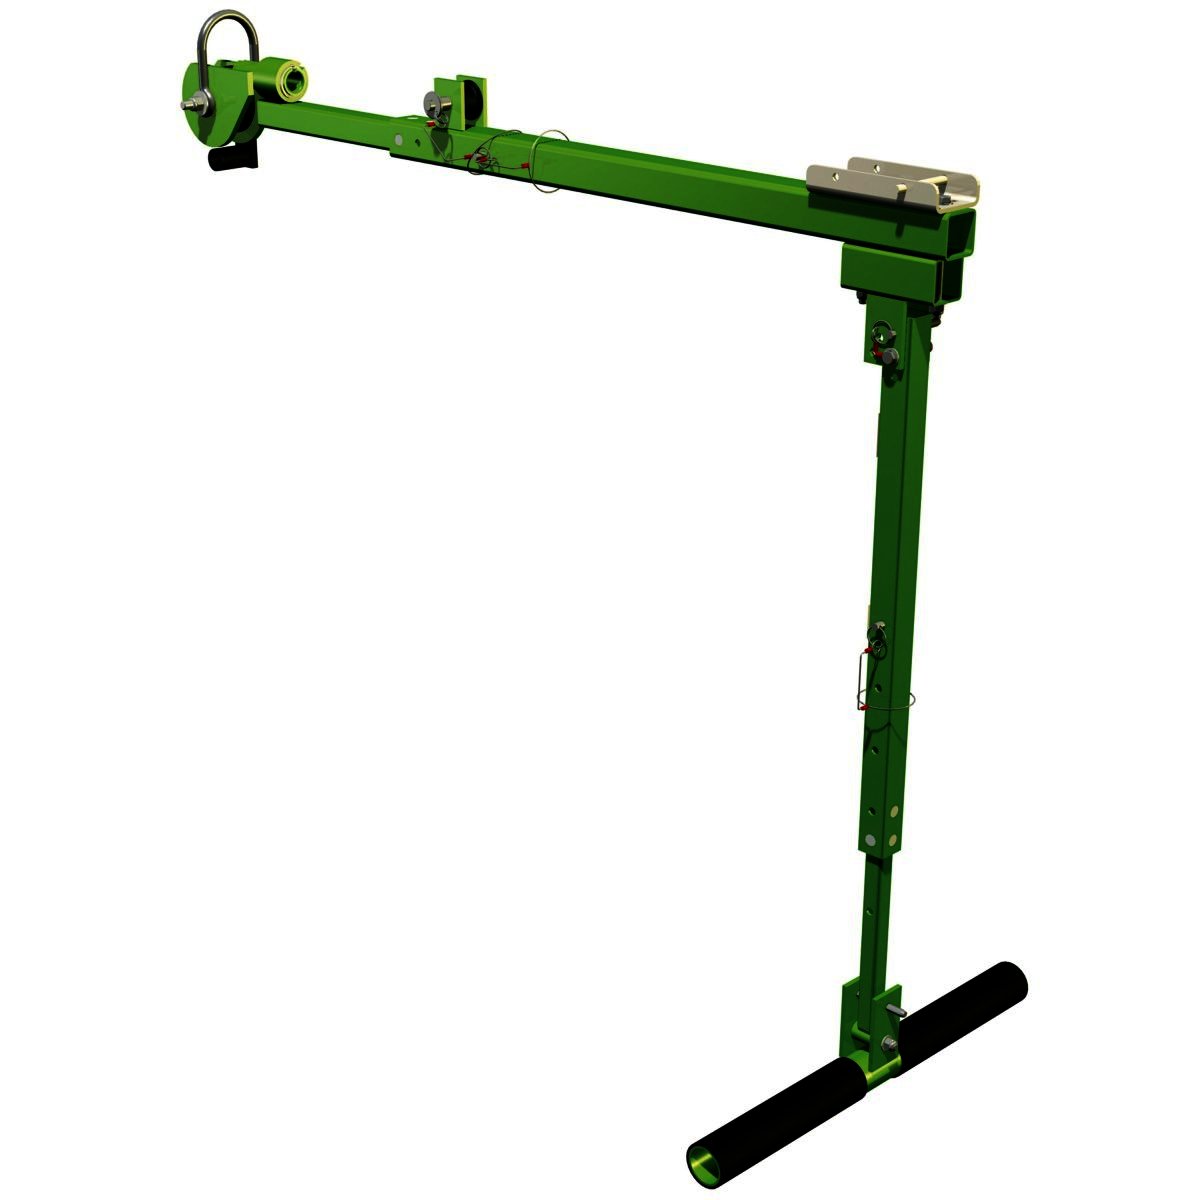 3M™ DBI-SALA® Confined Space Pole Hoist System 8530252 (Winch Sold Separately)